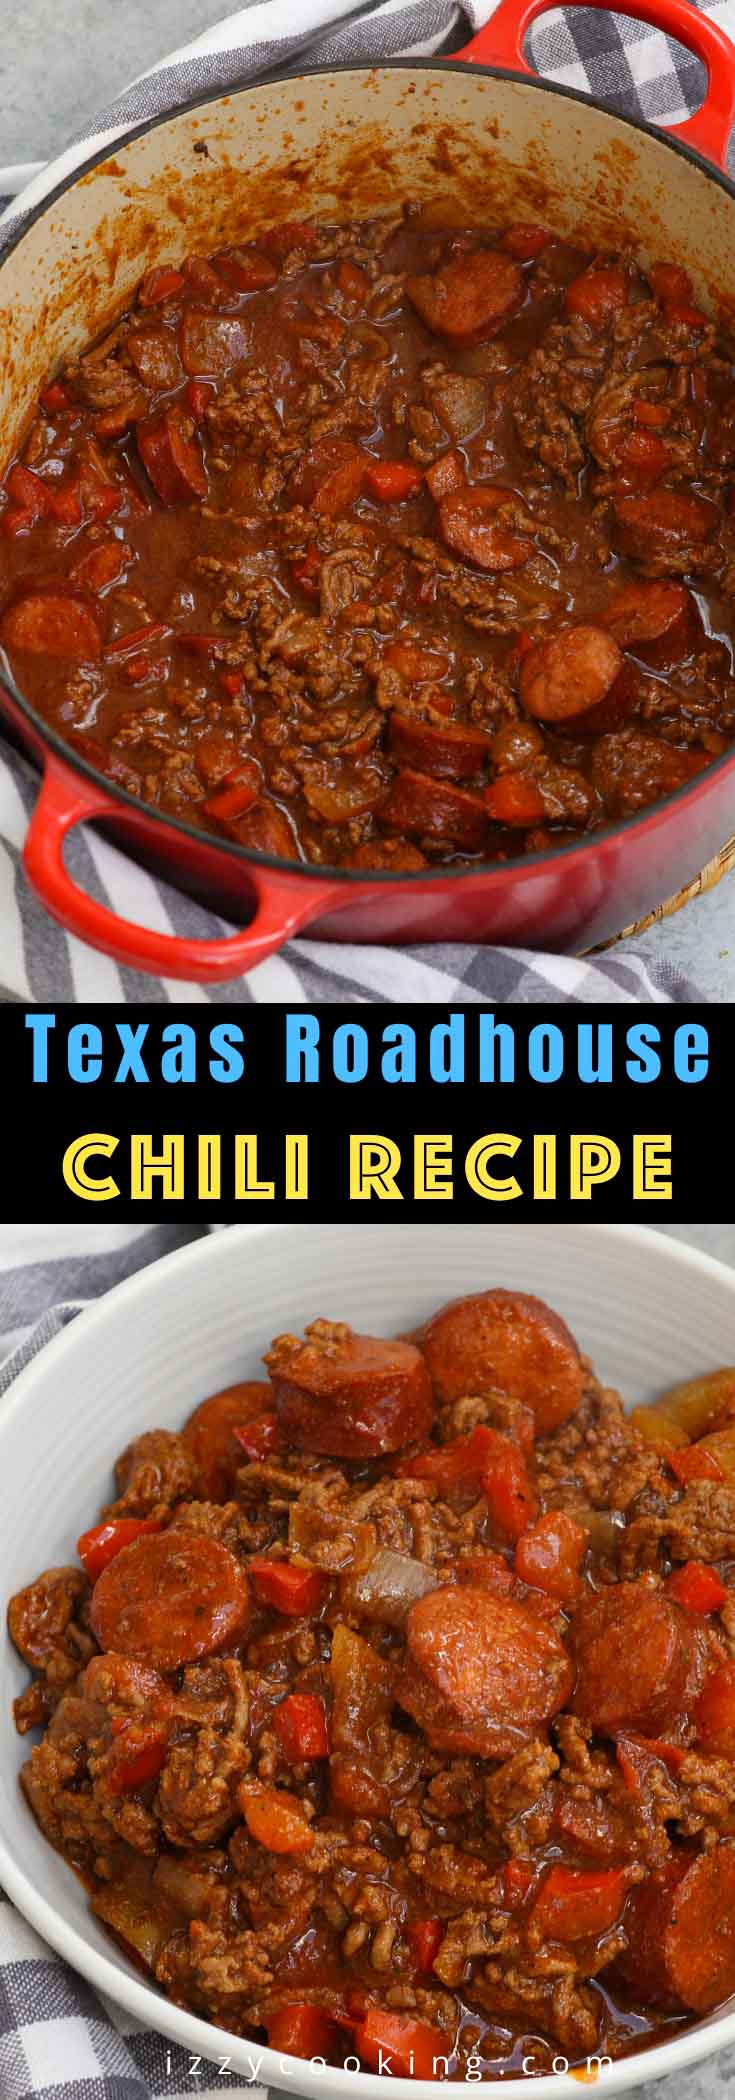 Texas Roadhouse is an American chain restaurant famous for its Southwestern cuisine. Popular menu items include steak, ribs and their infamous Texas Roadhouse Chili. Known for its spicy, smoky flavor, this copycat chili recipe is a two-meat treat for those who want a warm bowl of hearty comfort. 